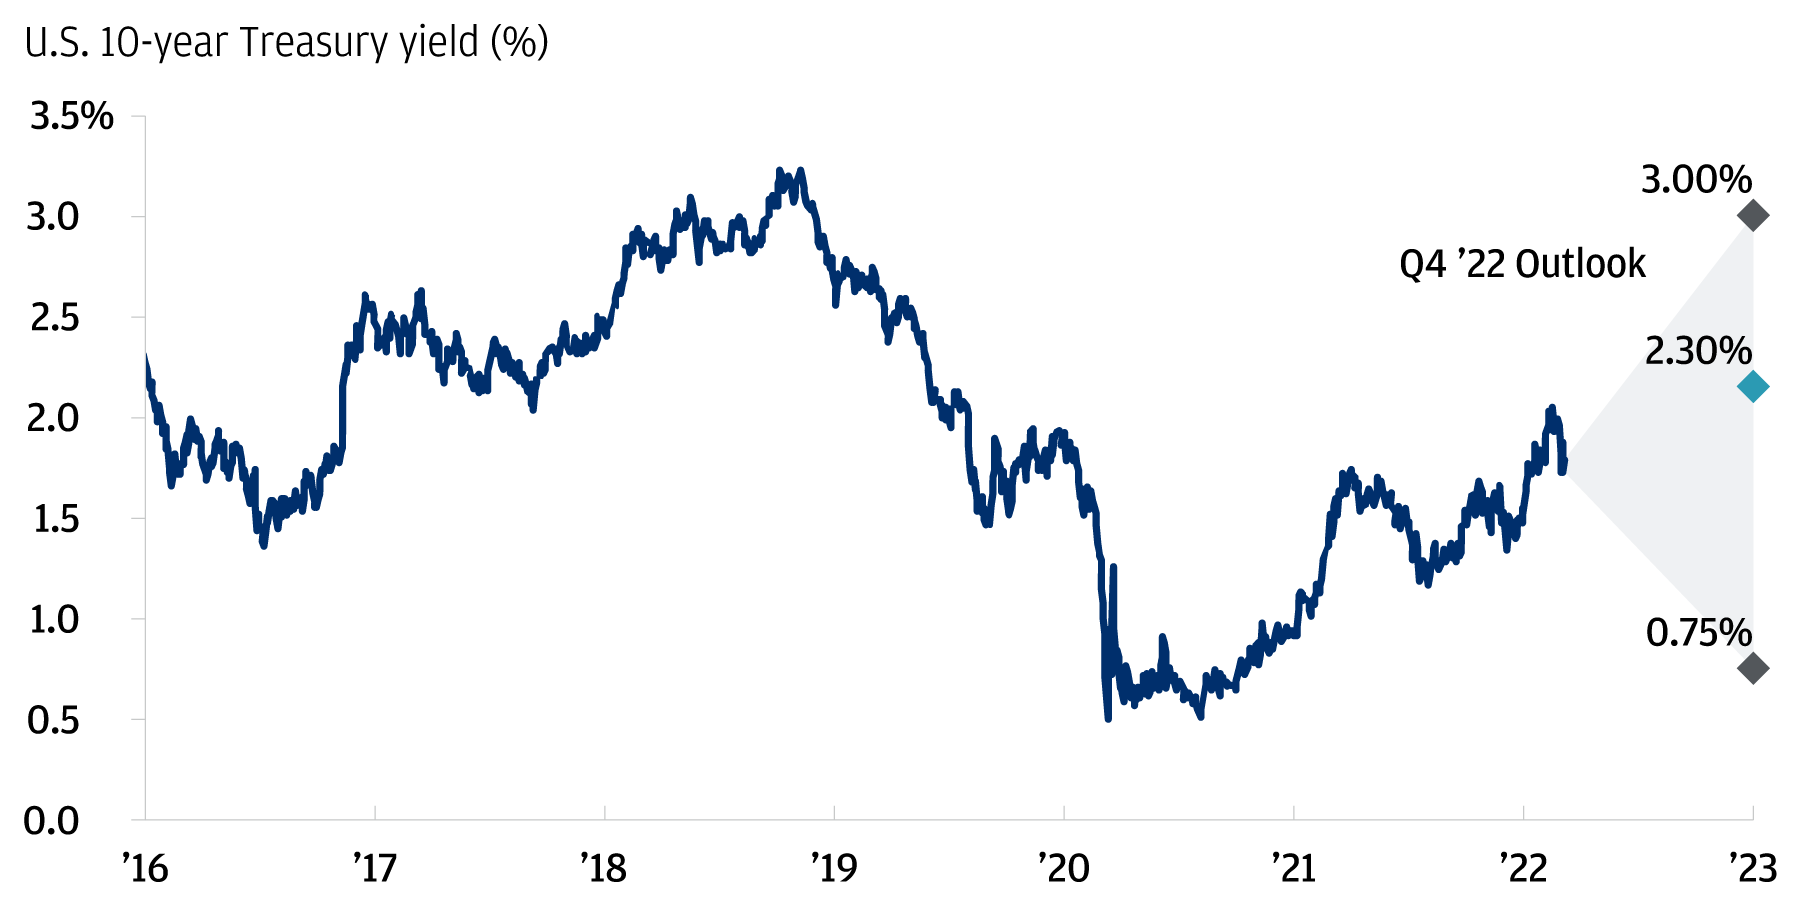 This chart shows the 10-year Treasury yield since 2016. It has risen significantly since its record low of 0.5% in 2020.